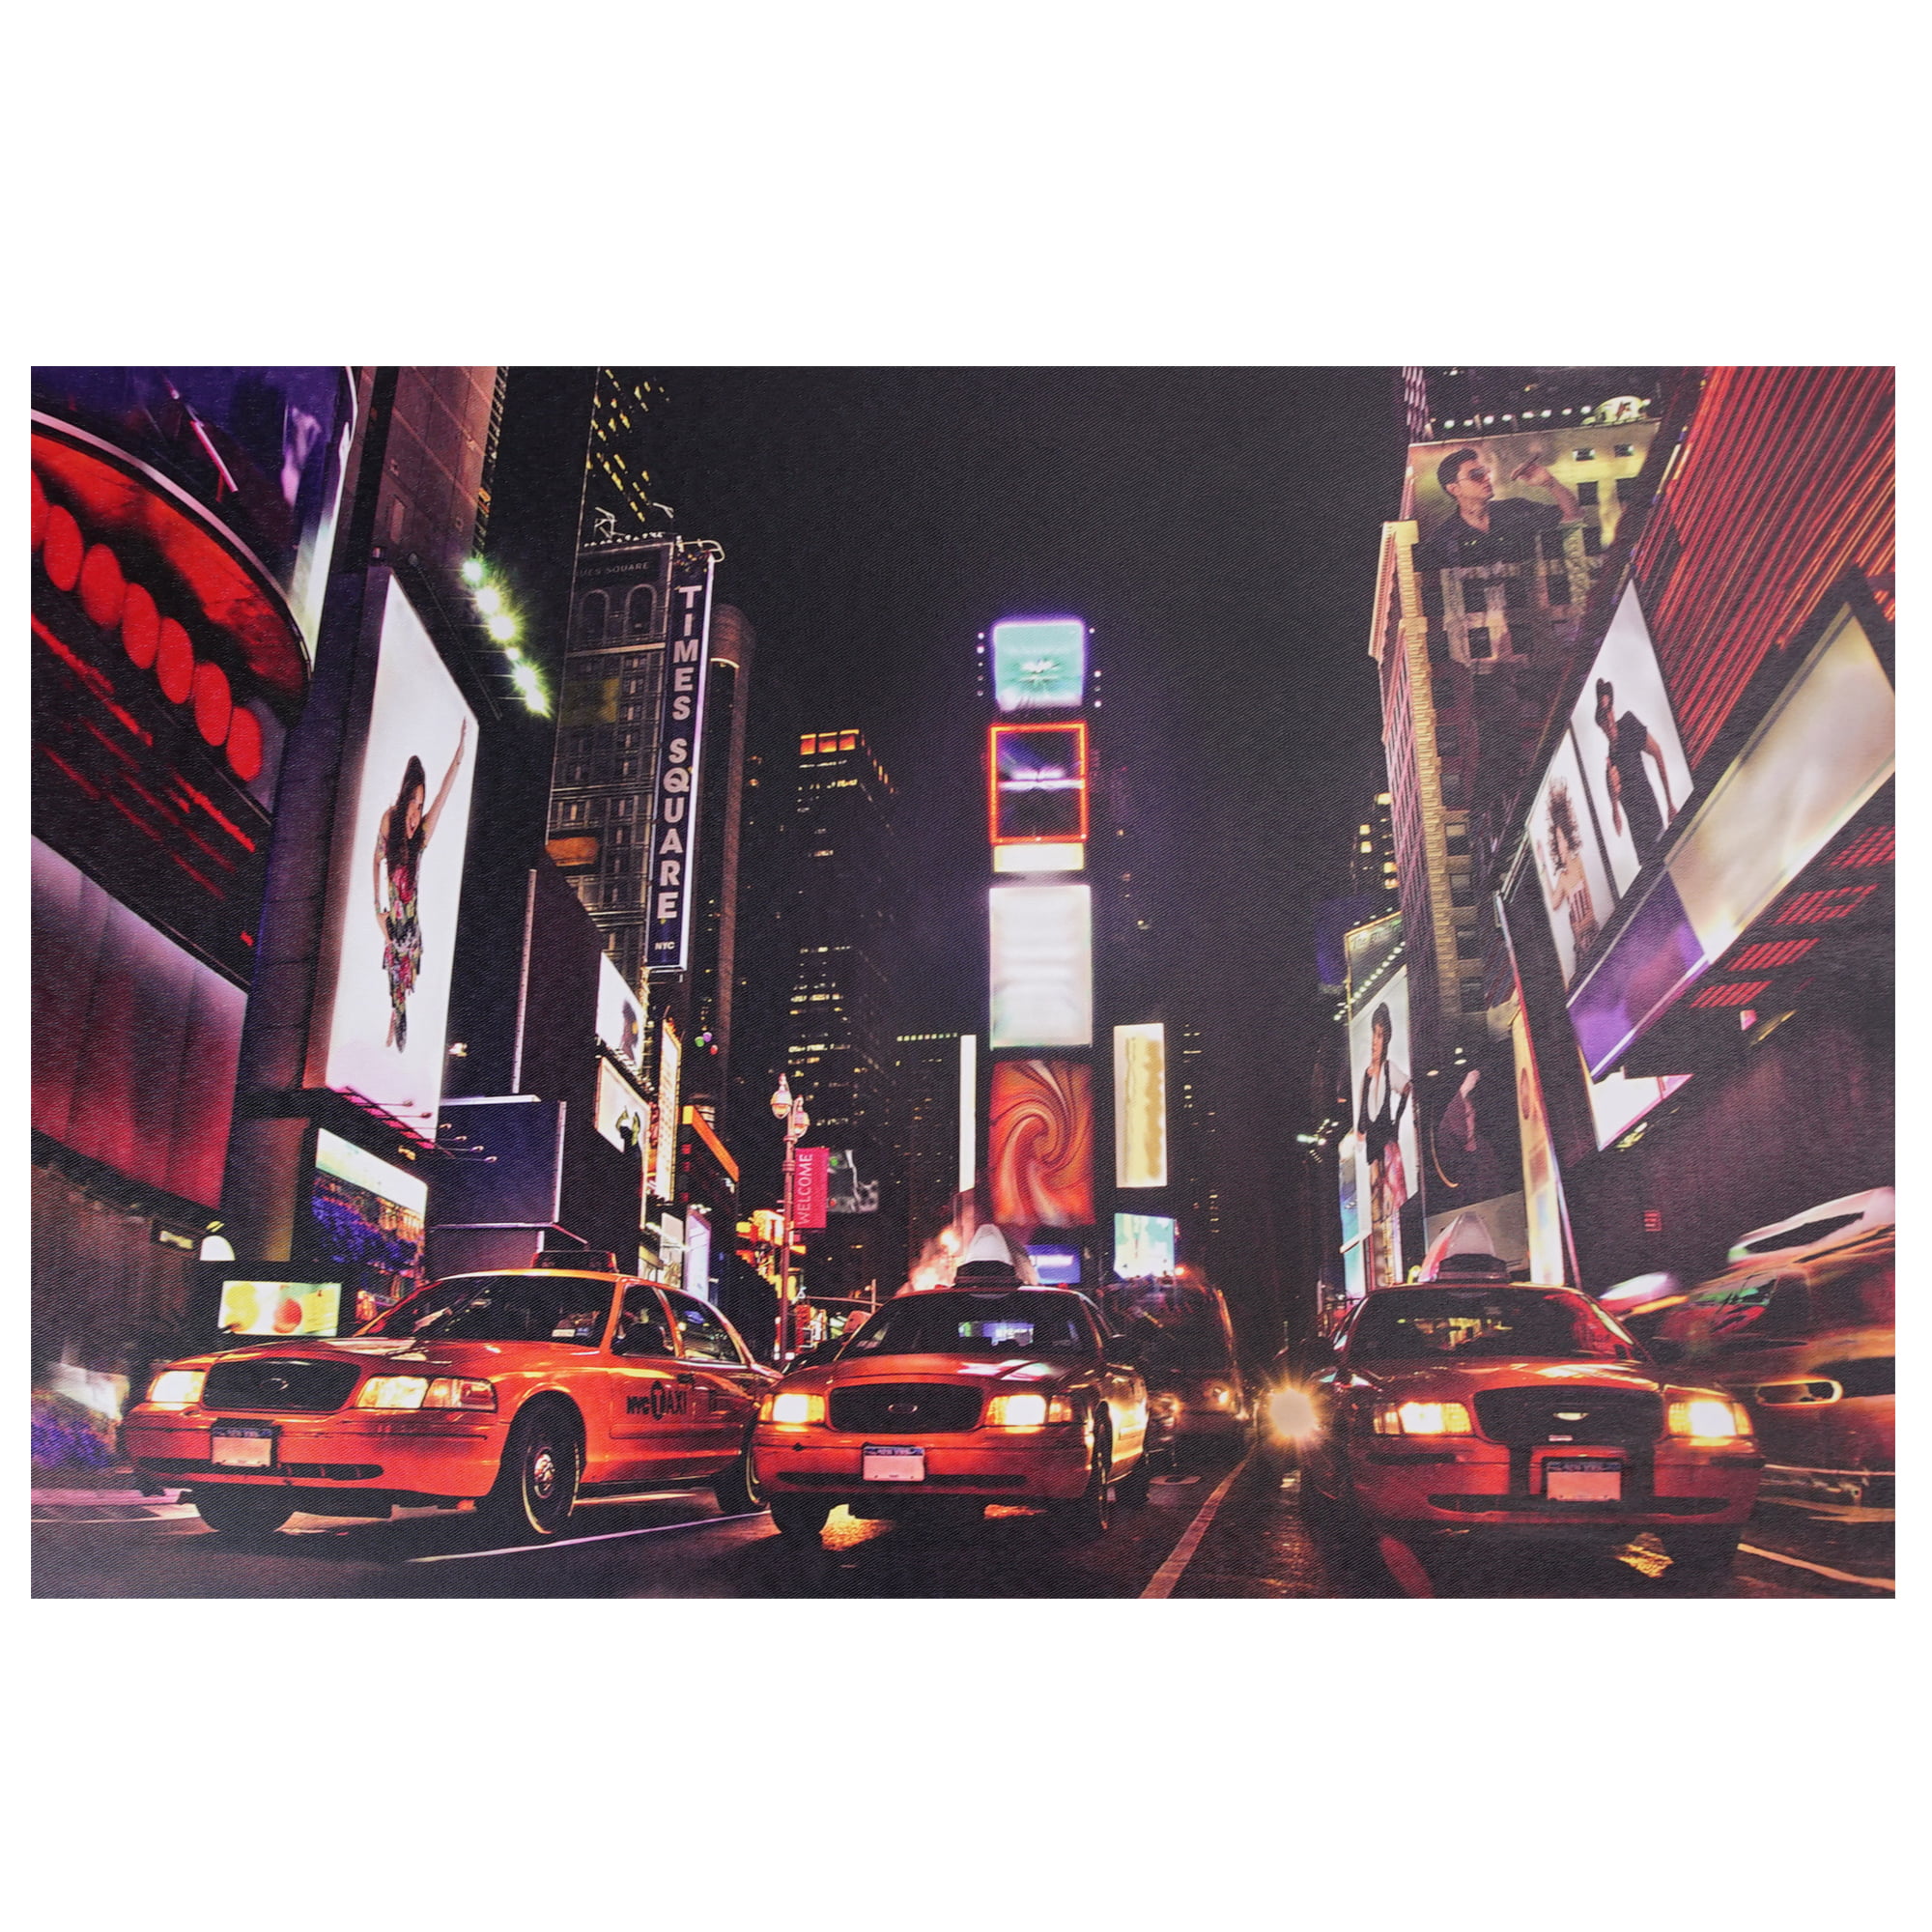 EXPRESS GIFT CARD "TIMES SQUARE NYC" NEW YORK CITY COLLECTIBLE NO VALUE NEW 